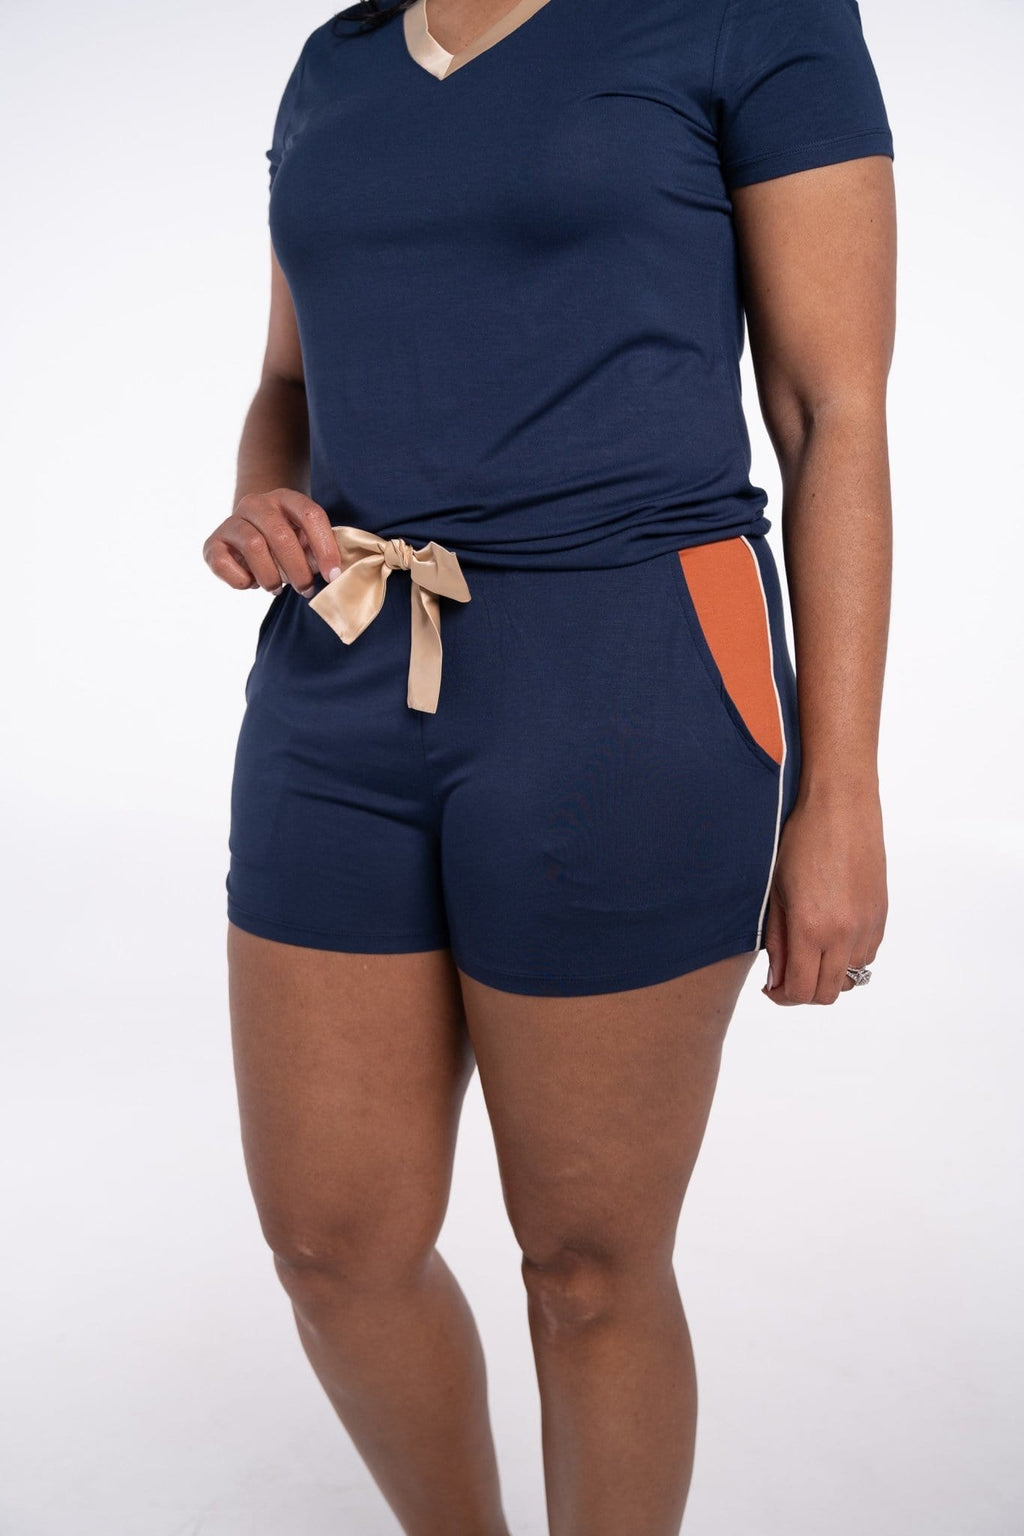 Rhea Cherie Short Set in navy blue with satin accent bow on shorts